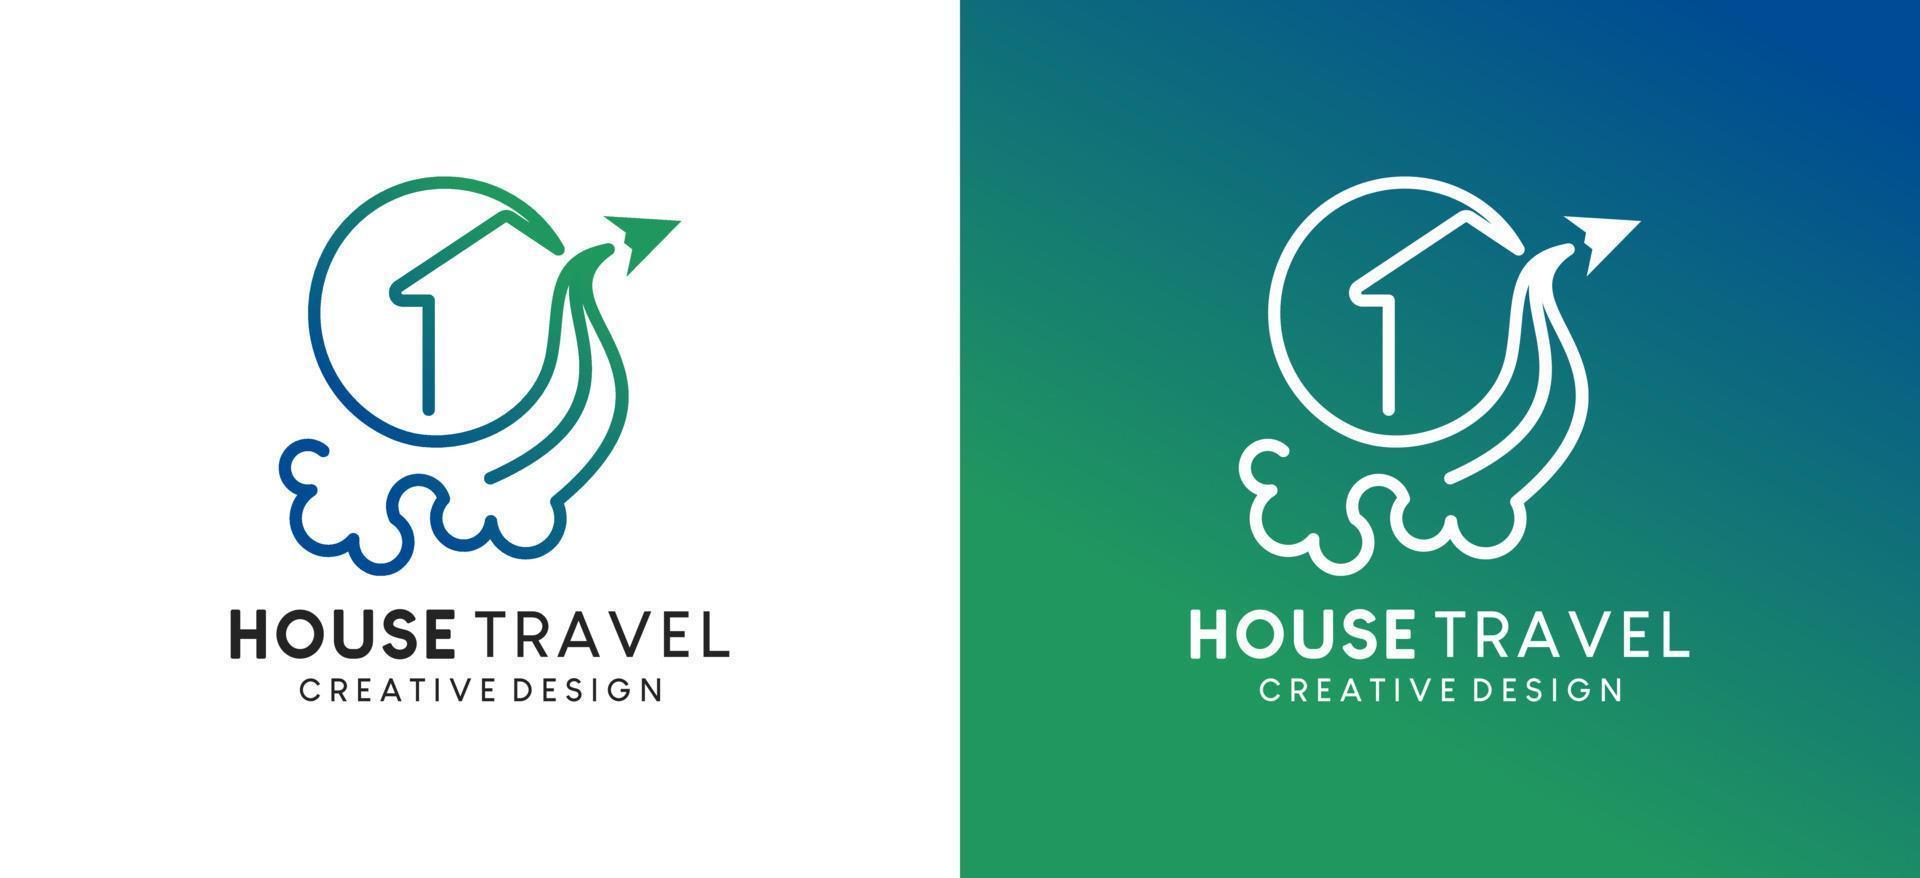 Travel home logo design with creative line art style vector